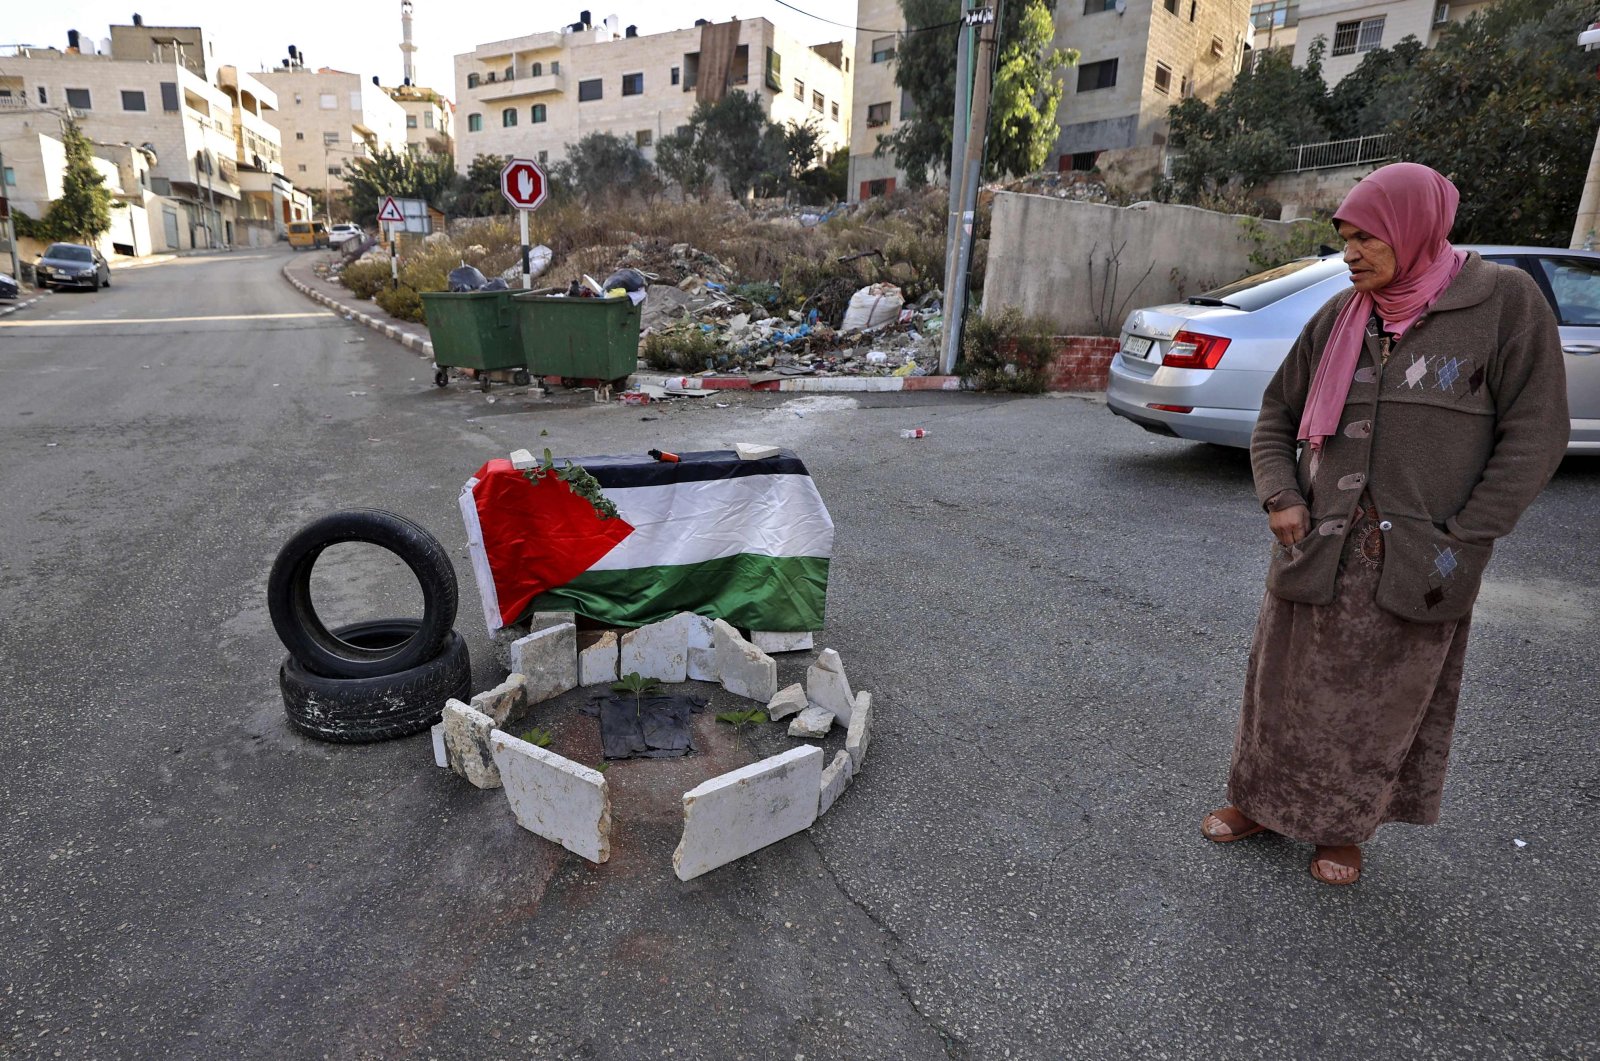 A Palestinian stands next to the place where 19-year-old Sana al-Tal was shot by Israeli forces, Ramallah, occupied West Bank, Nov. 14, 2022. (AFP Photo)